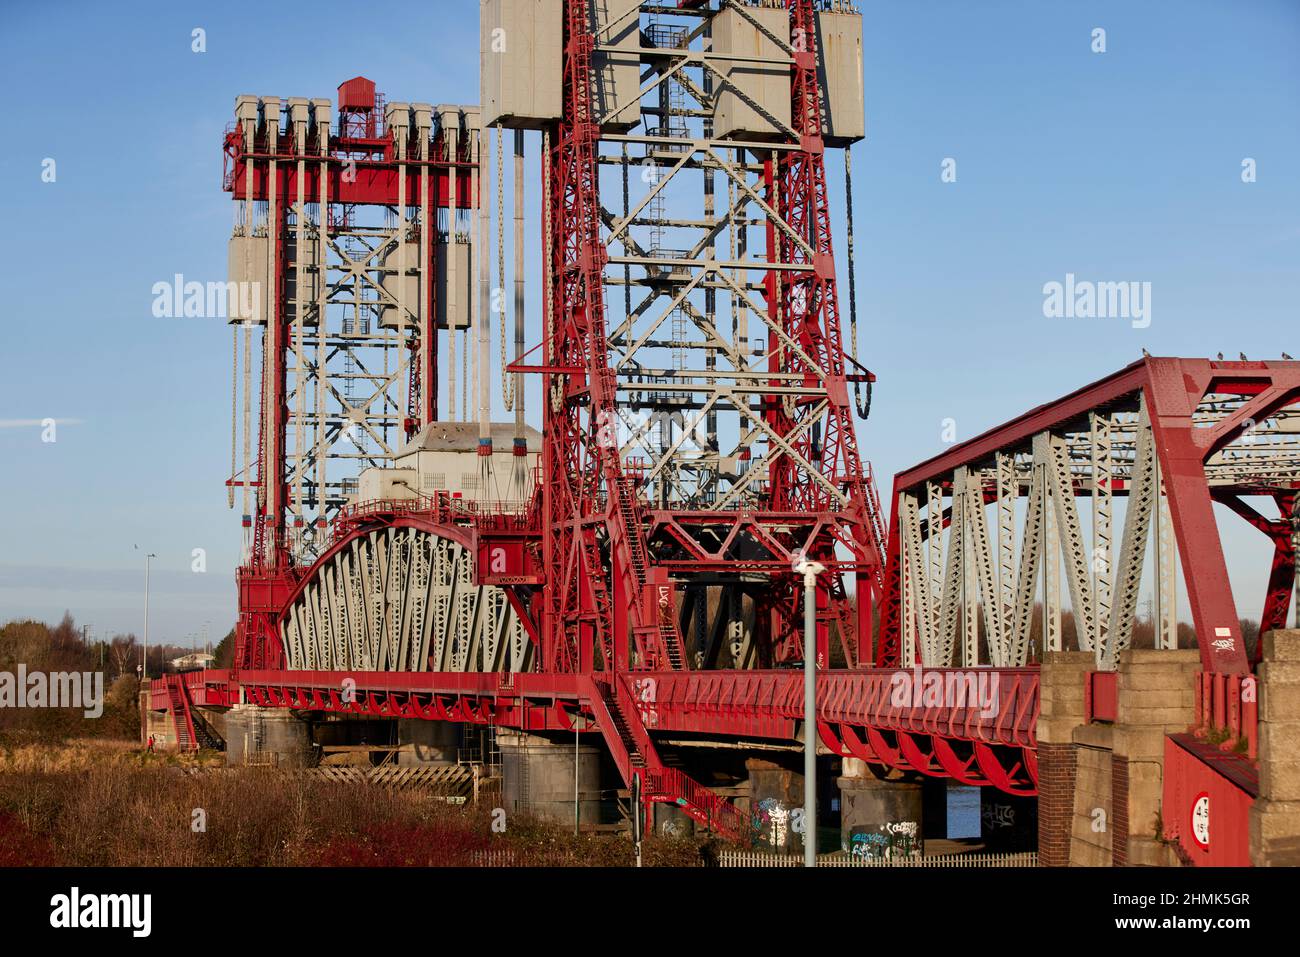 No longer working, Tees Newport Bridge is a vertical-lift bridge spanning the River Tees  linking Middlesbrough with  Stockton-on-Tees Stock Photo